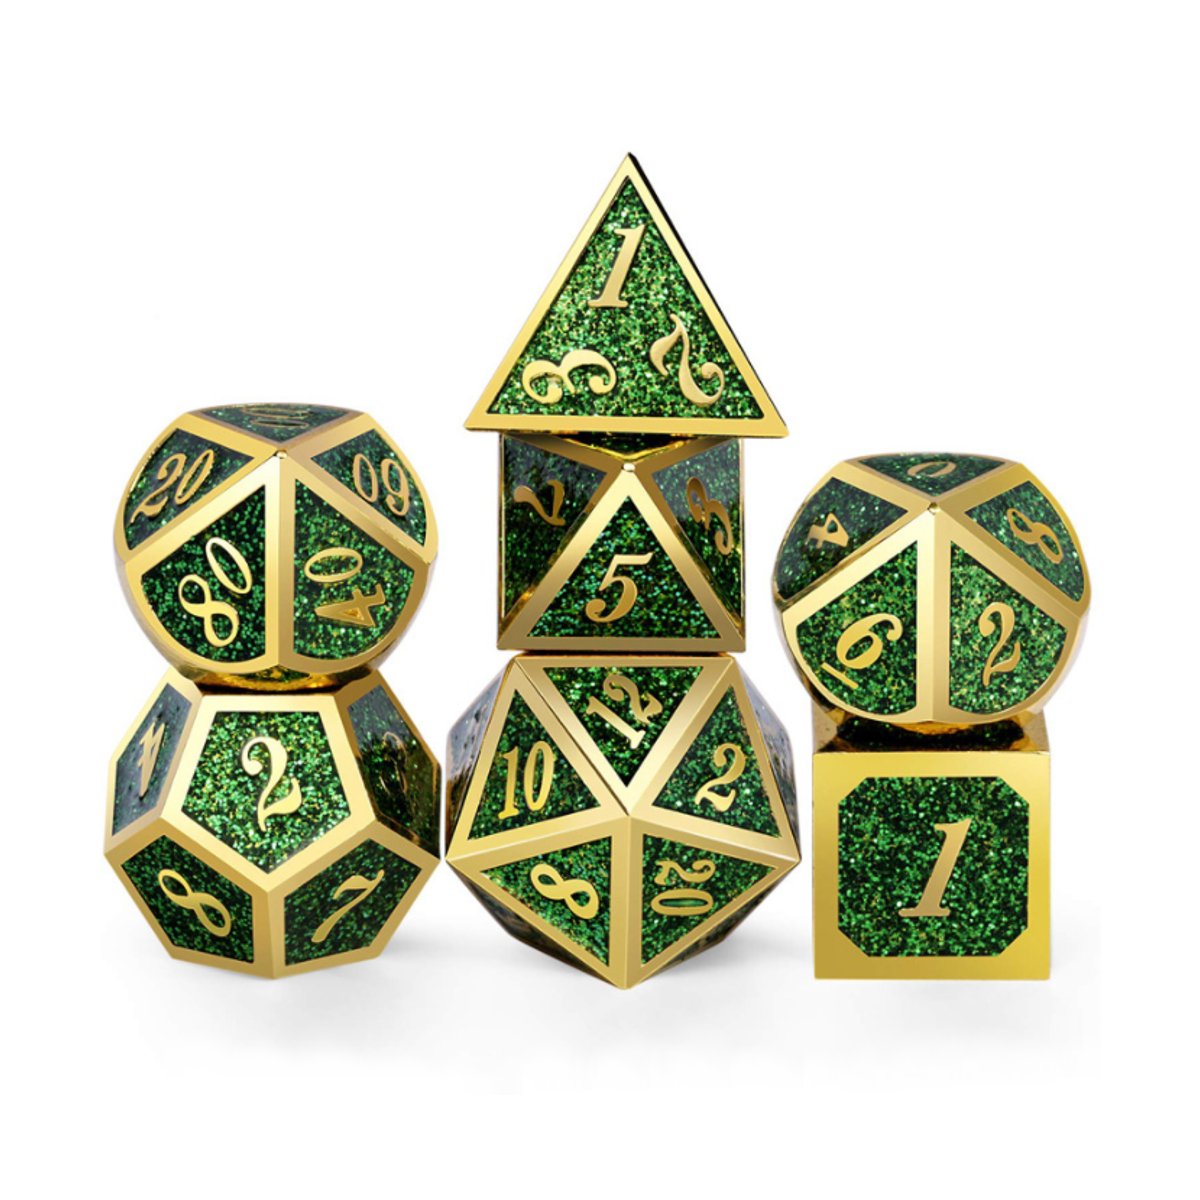 7pcs-Polyhedral-Dice-Zinc-Alloy-Dice-Set-Heavy-Duty-Dices-For-Role-Playing-Game-Dice-Set-1590750-3